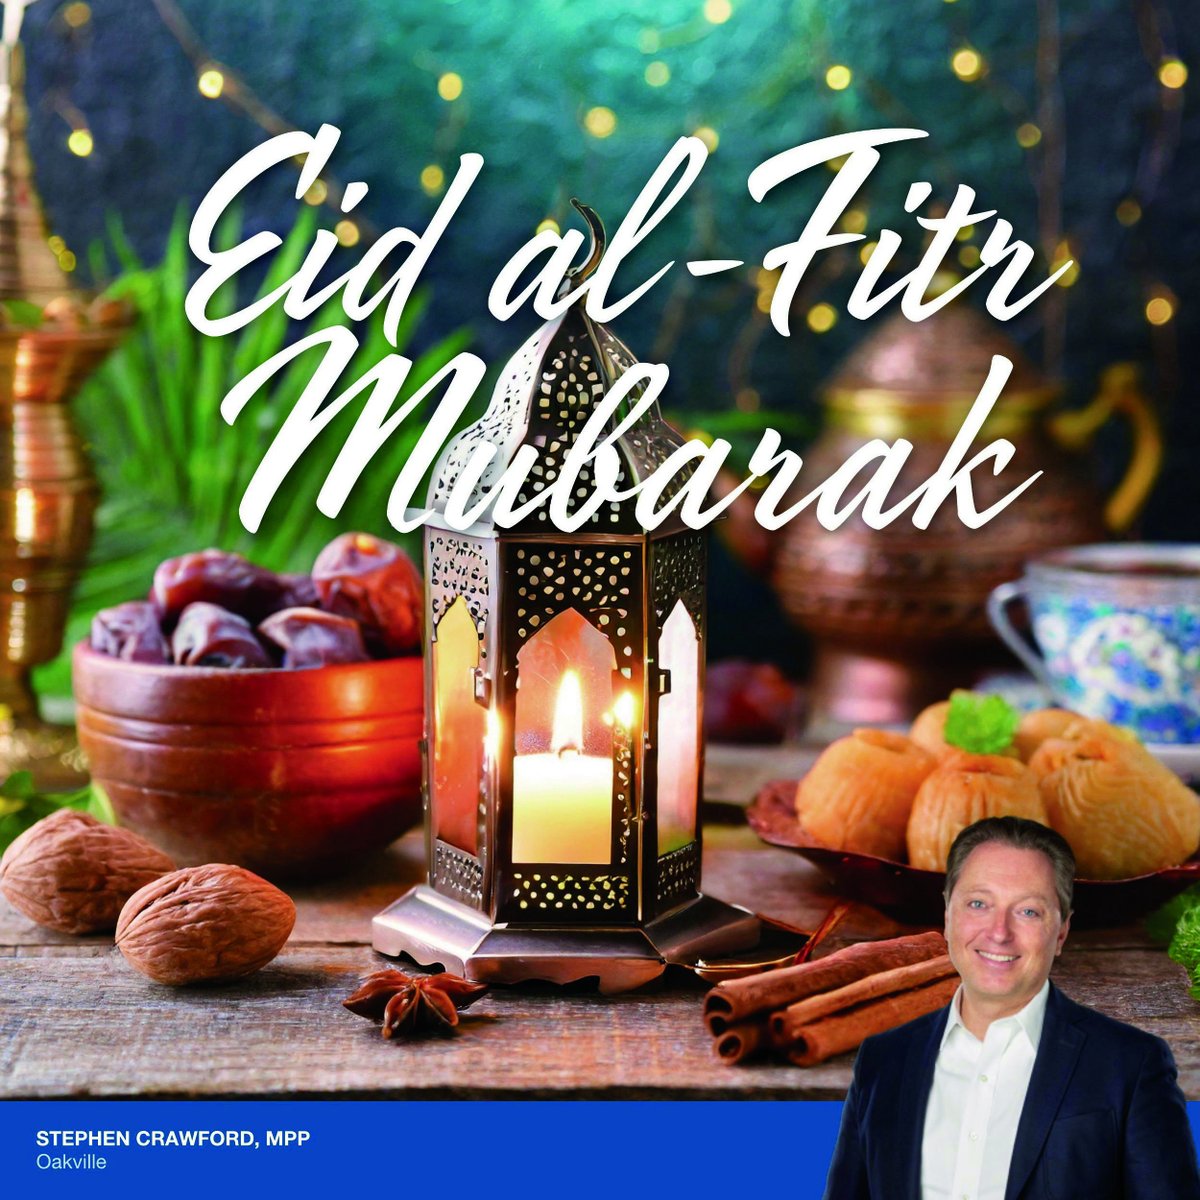 Tonight, Muslim Ontarians will celebrate #EidAlFitr, symbolizing the end of Ramadan and the month-long fast. May you have a wonderful celebration with friends and family. #EidMubarak